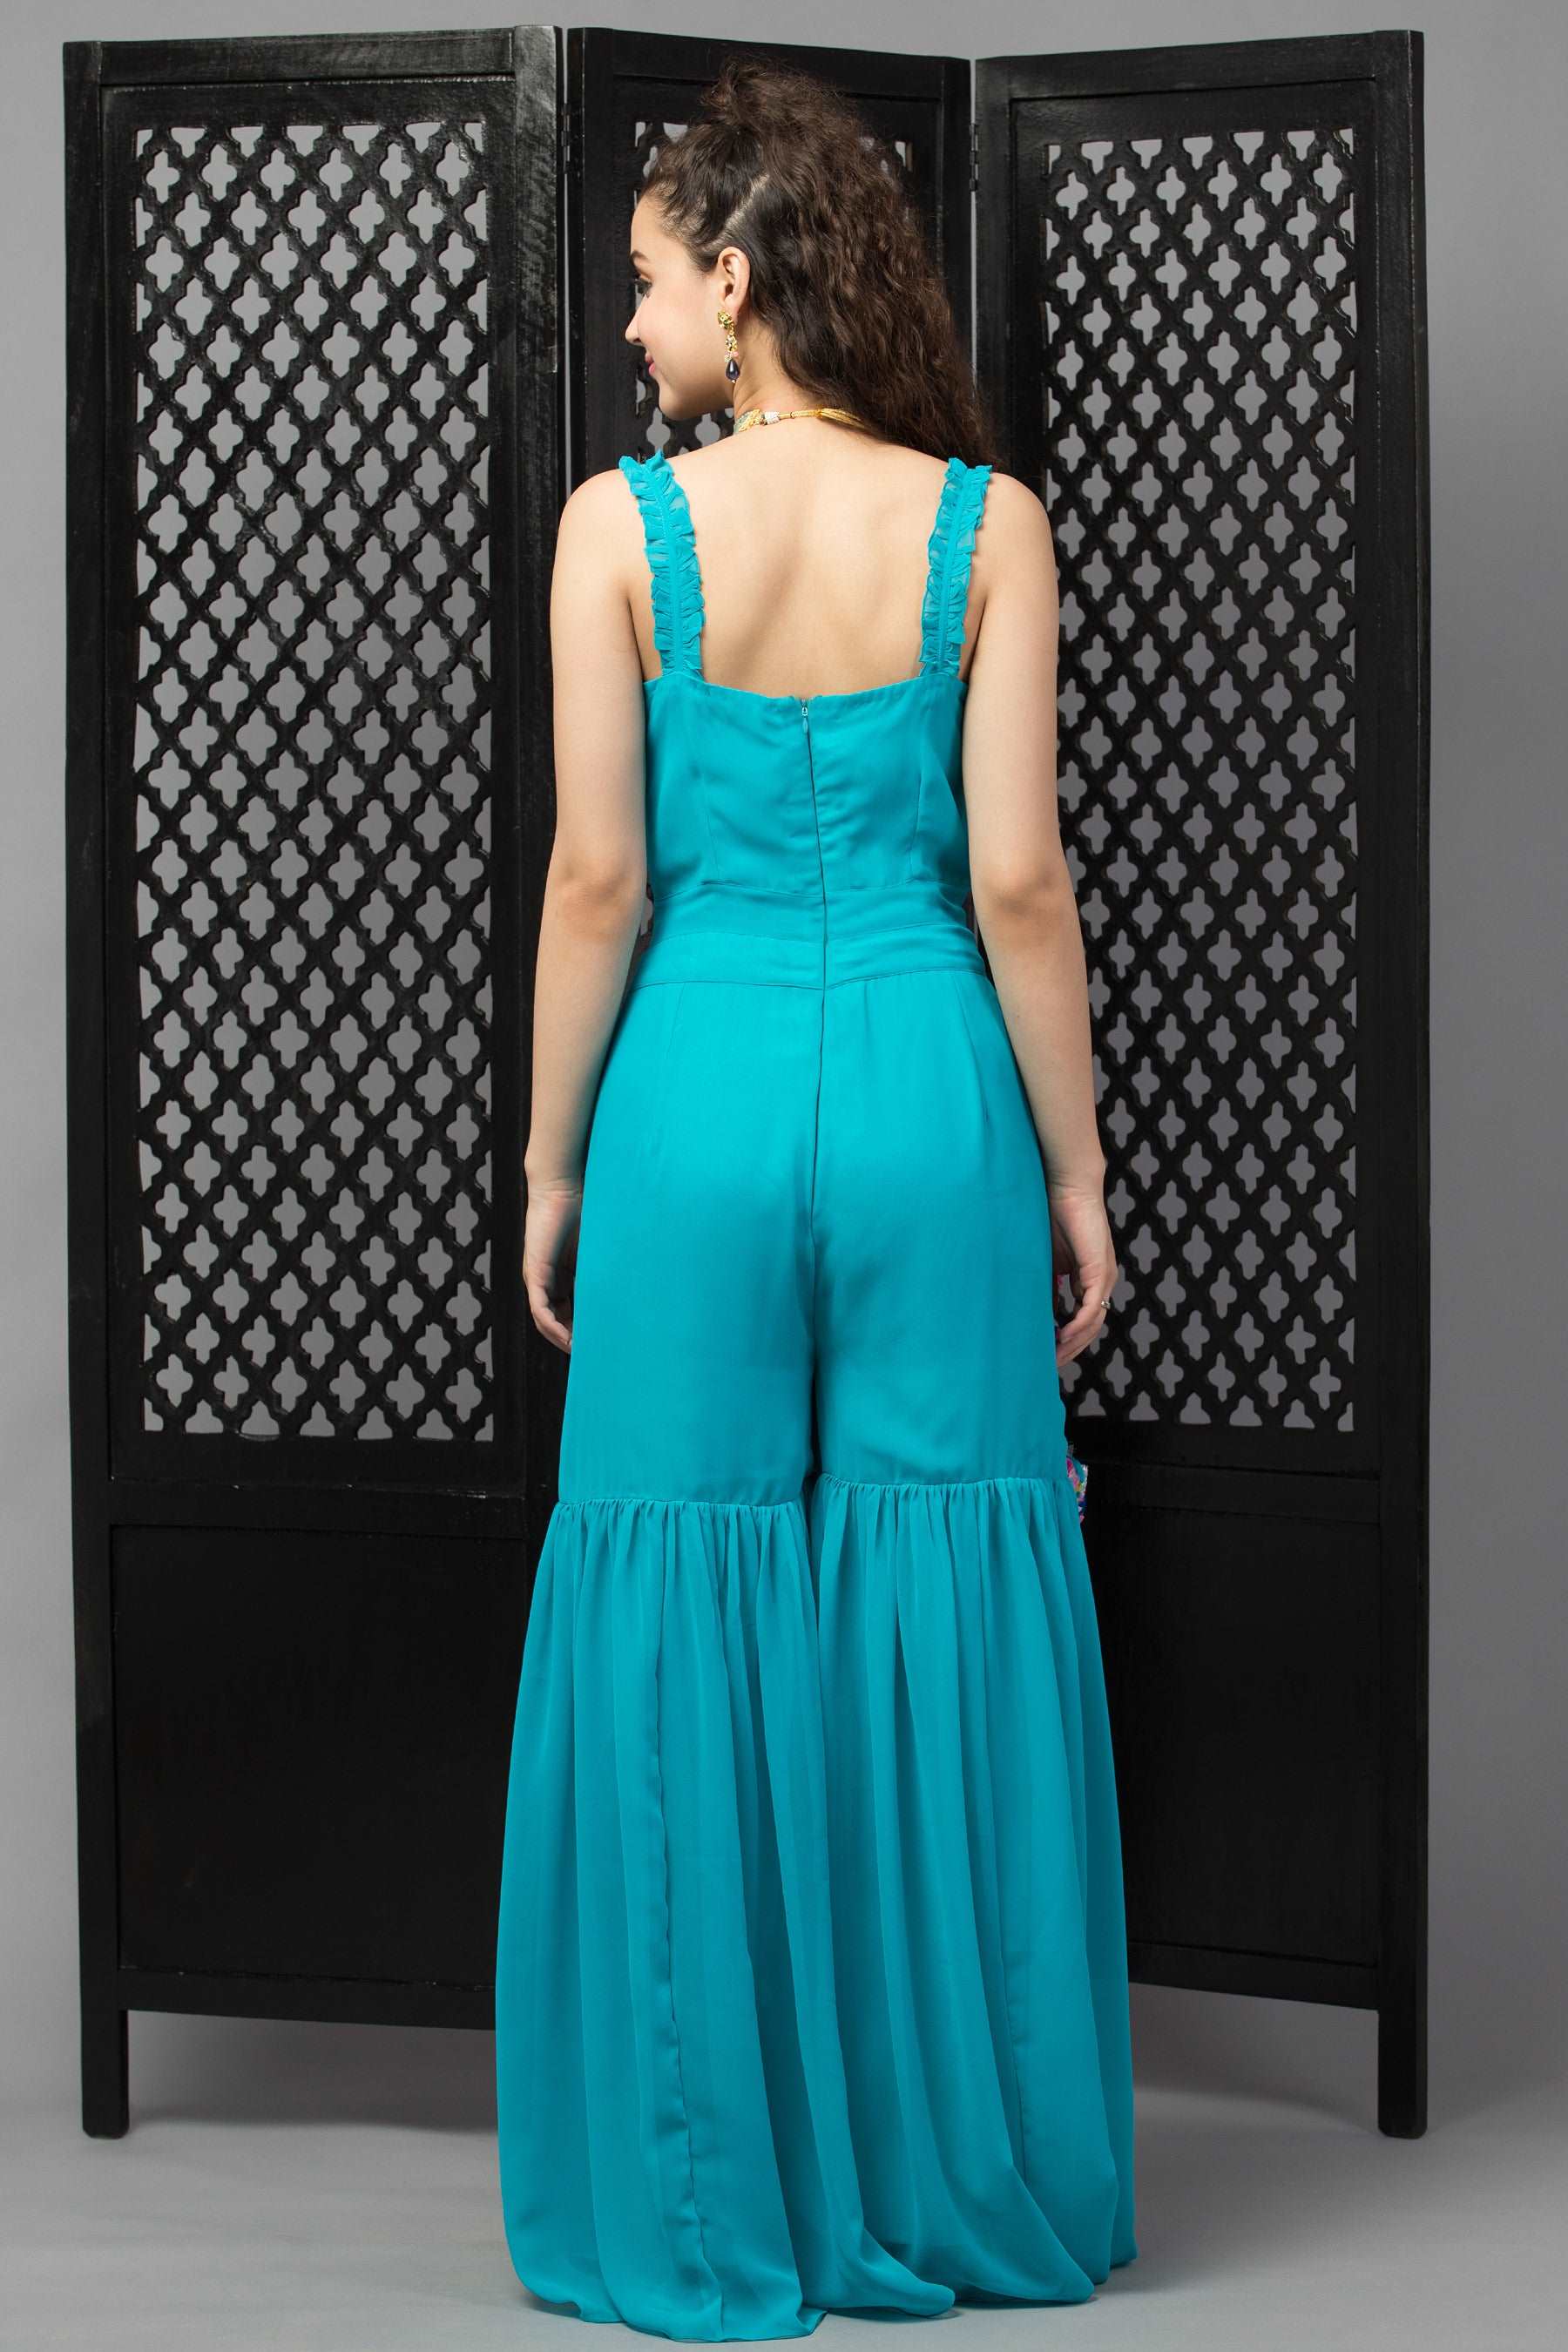 Buy Indo Western Jumpsuit For Women Girl's (Cream, Teal Green - M) at  Amazon.in